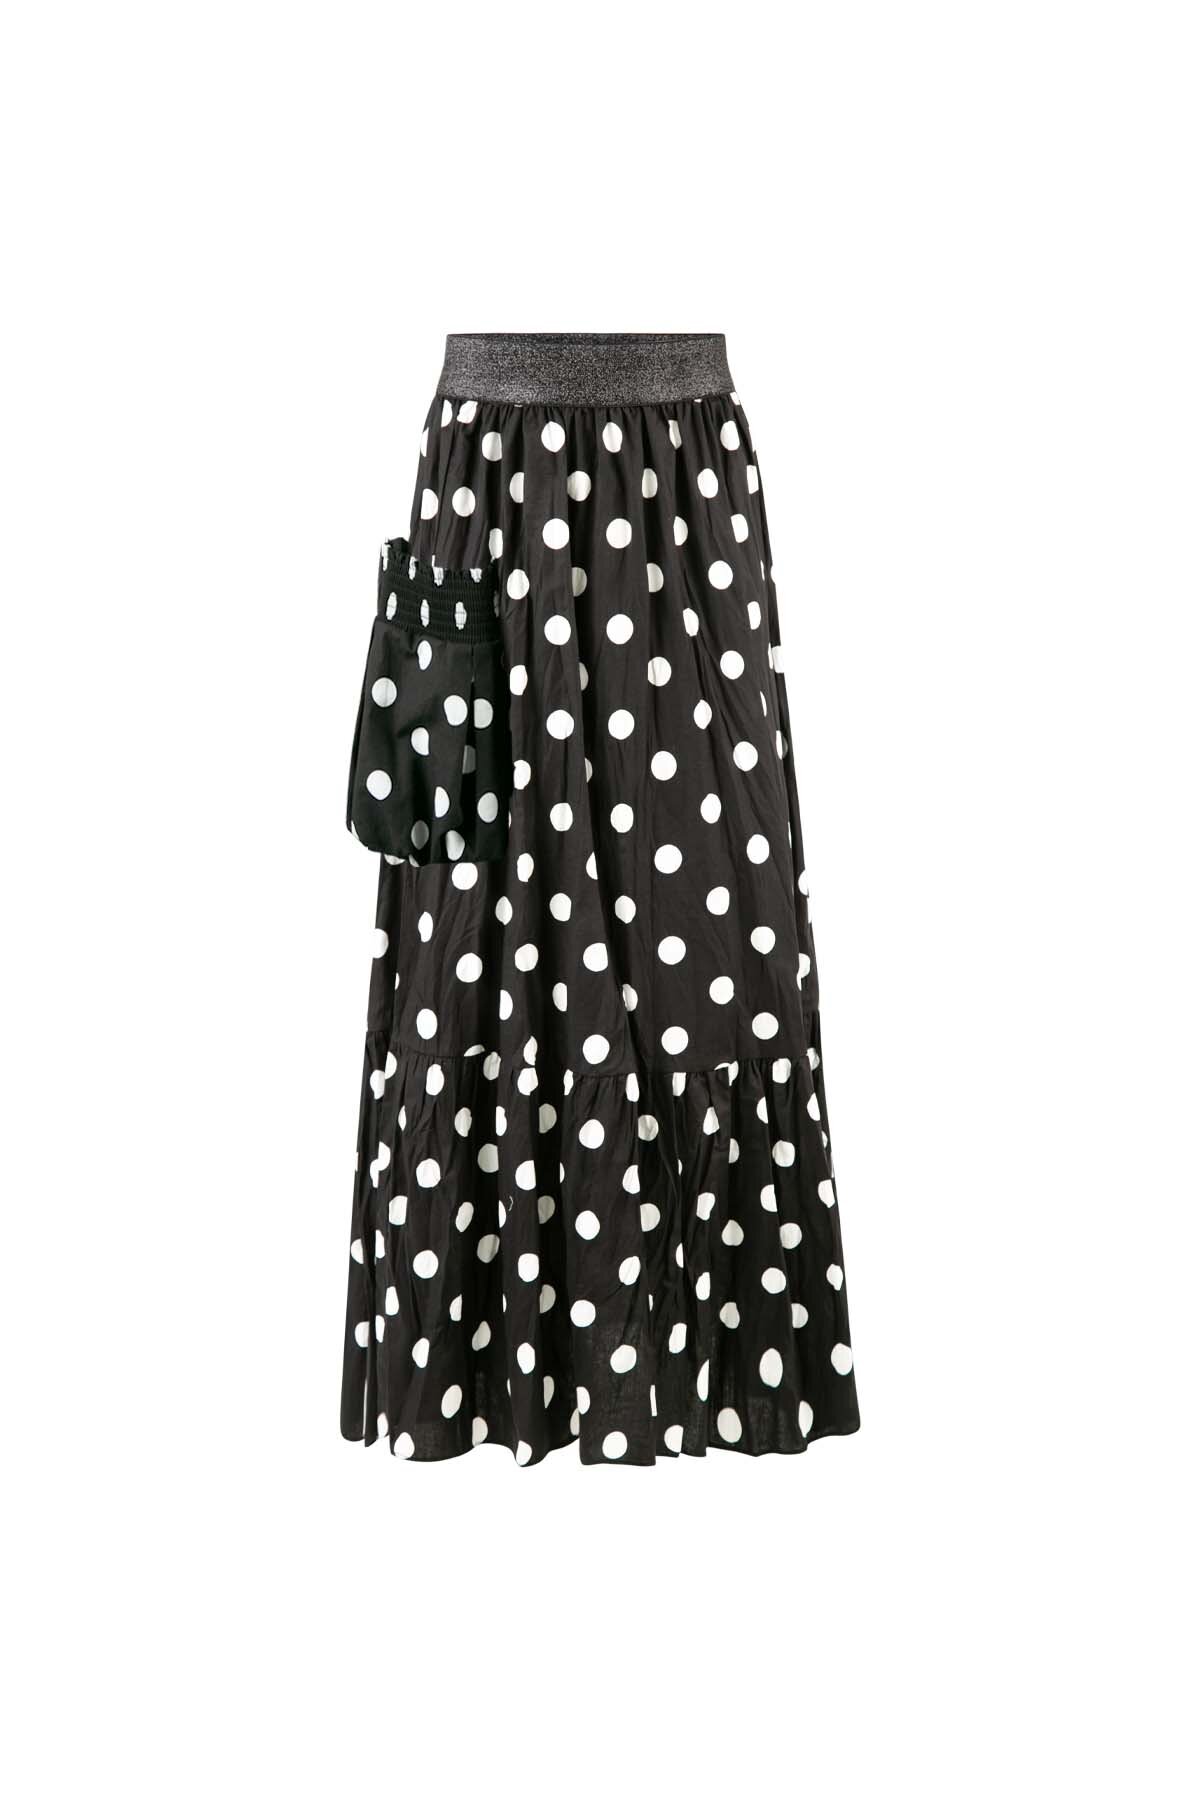 POWER PUFF Skirt - Curate : Trelise Cooper Online - TRAVELLING DOT ...